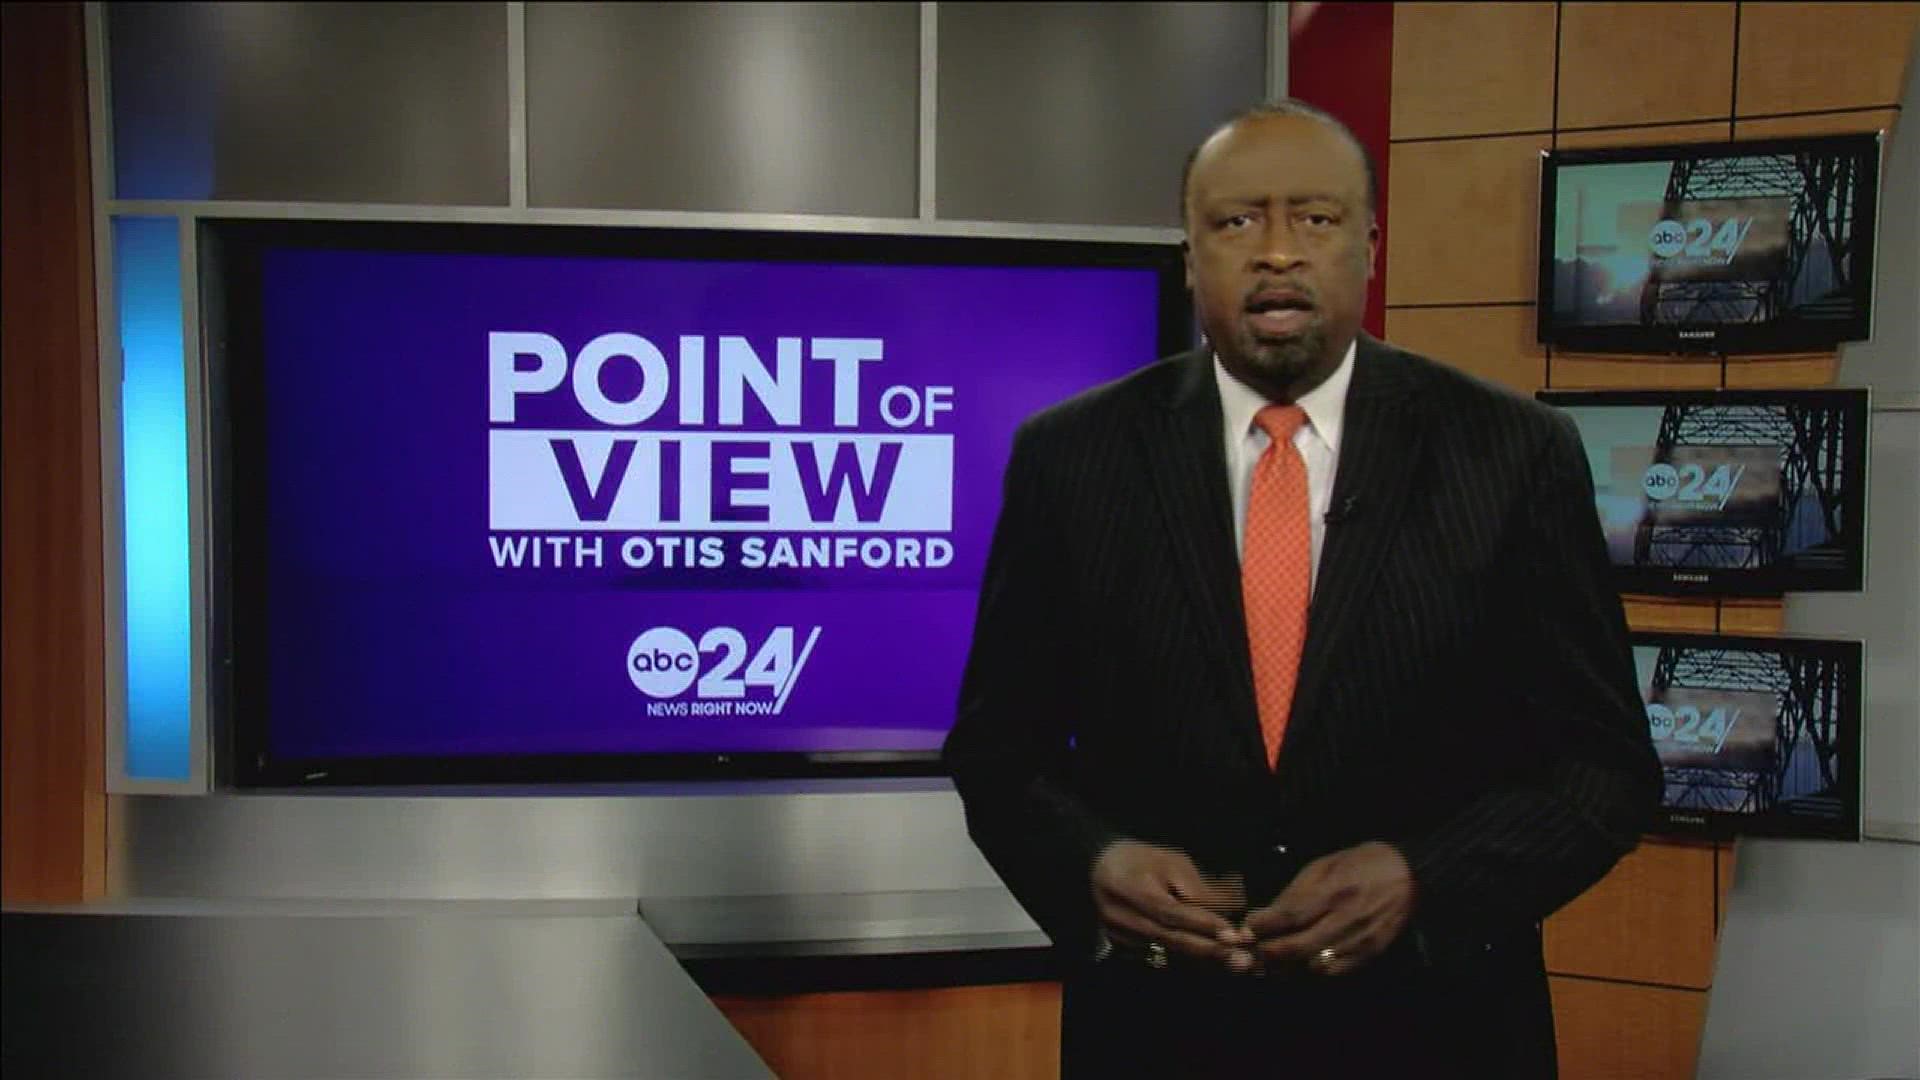 ABC 24 political analyst and commentator Otis Sanford shared his point of view on the Supreme Court ruling in favor of Tennessee in a water dispute with Mississippi.